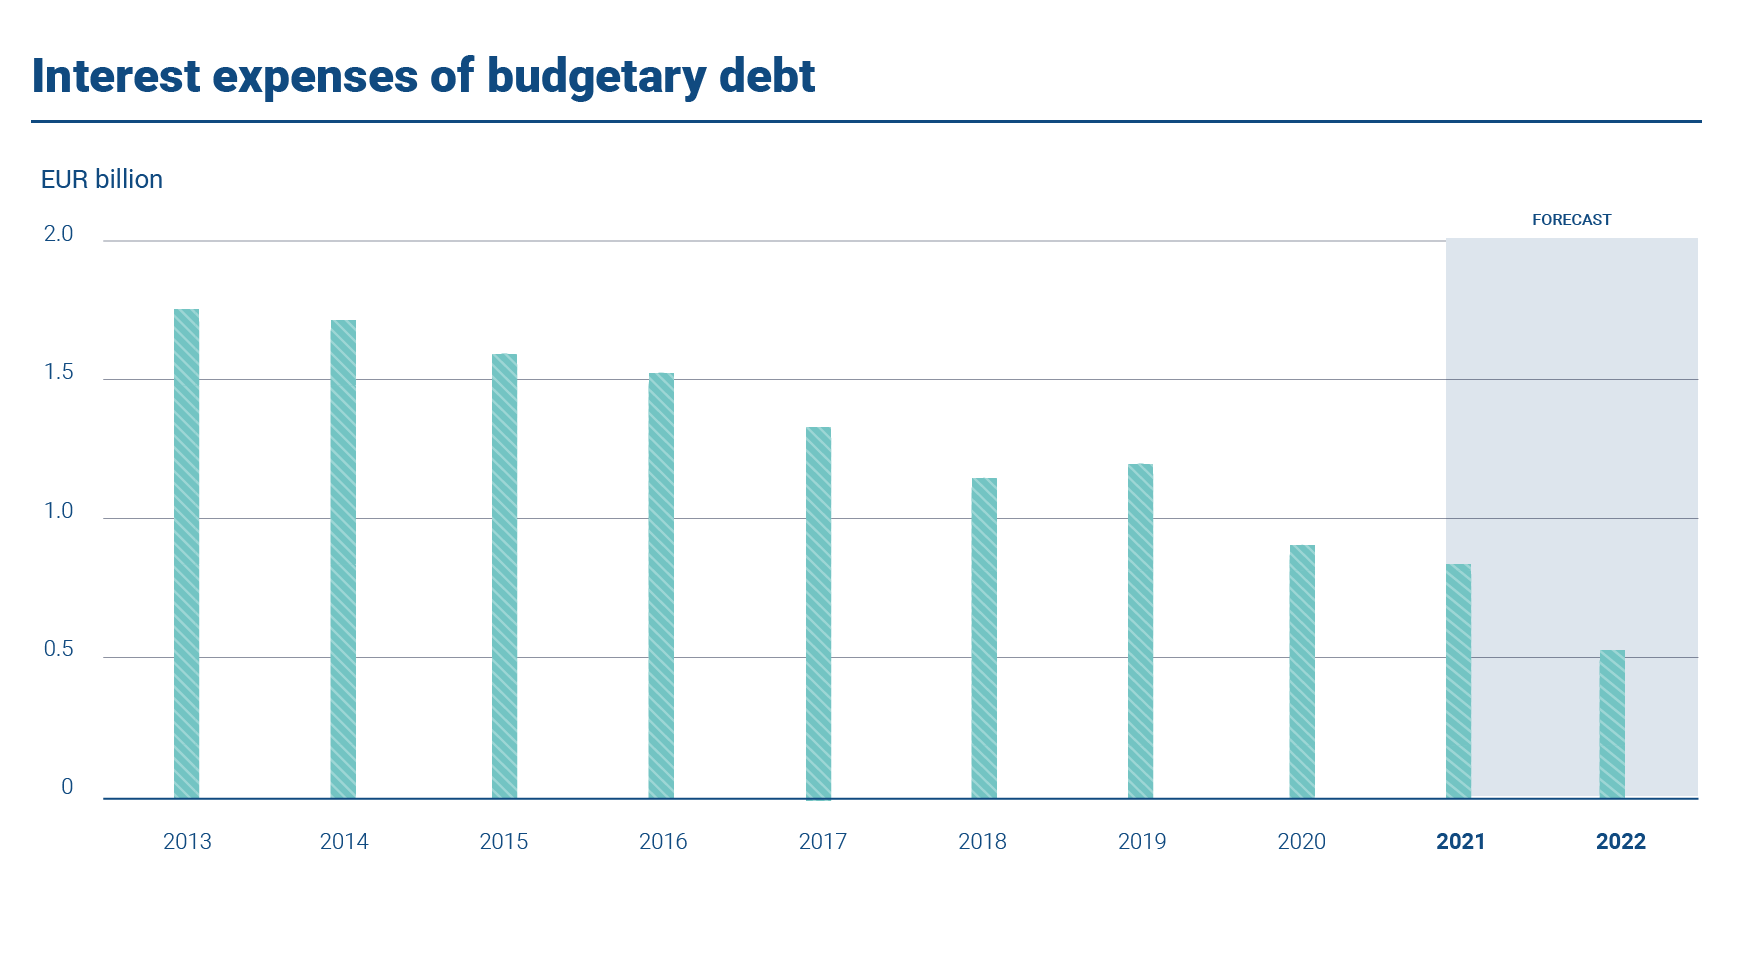 The statistics present the annual interest expenses of budgetary debt in 2013-22. In 2021 the interest expenses were EUR 0.8 billion. The forecast for 2021 is EUR 0.5 billion.